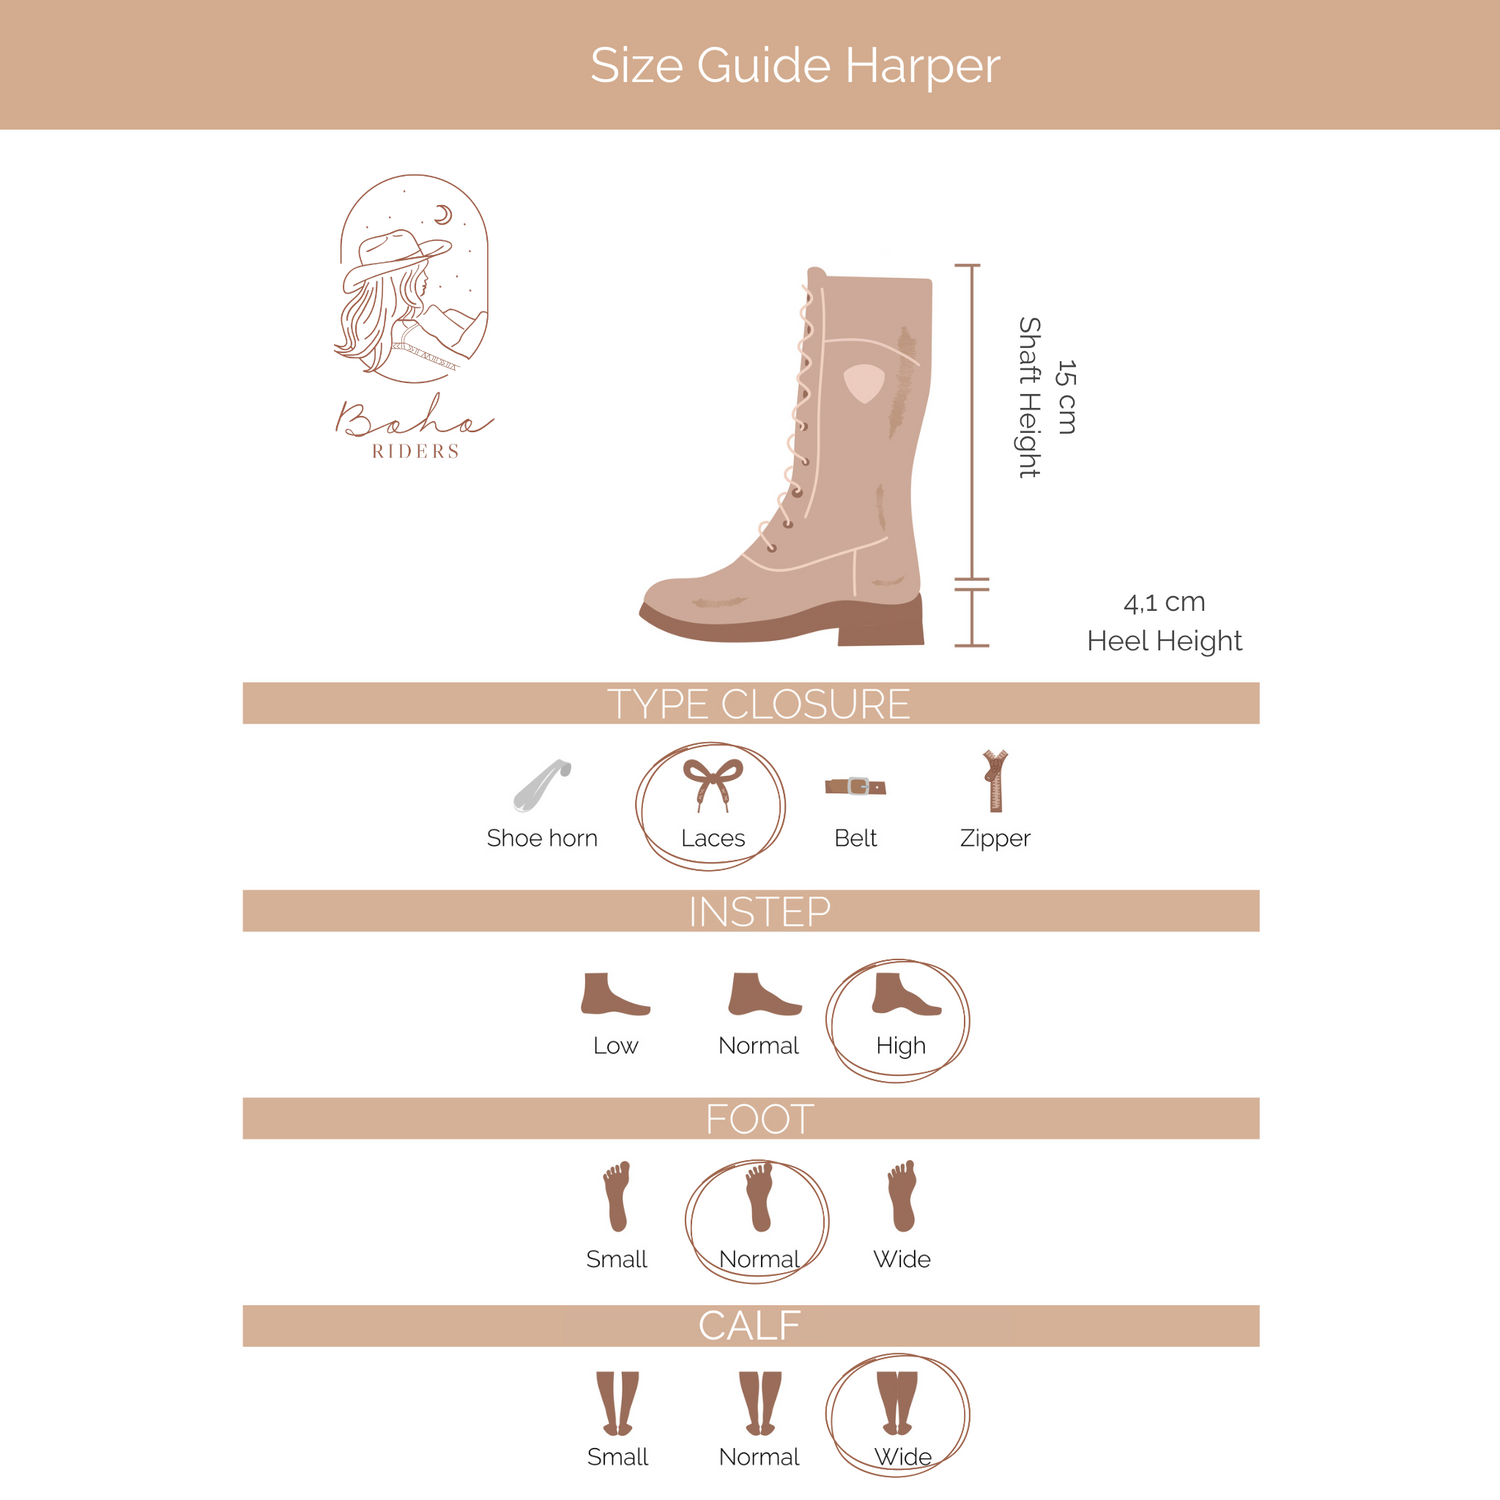 What you want to know about the fit ofAriat Harper H2O Waterproof Boots - Riding Boots - Outdoor Shoe - Dark Brown